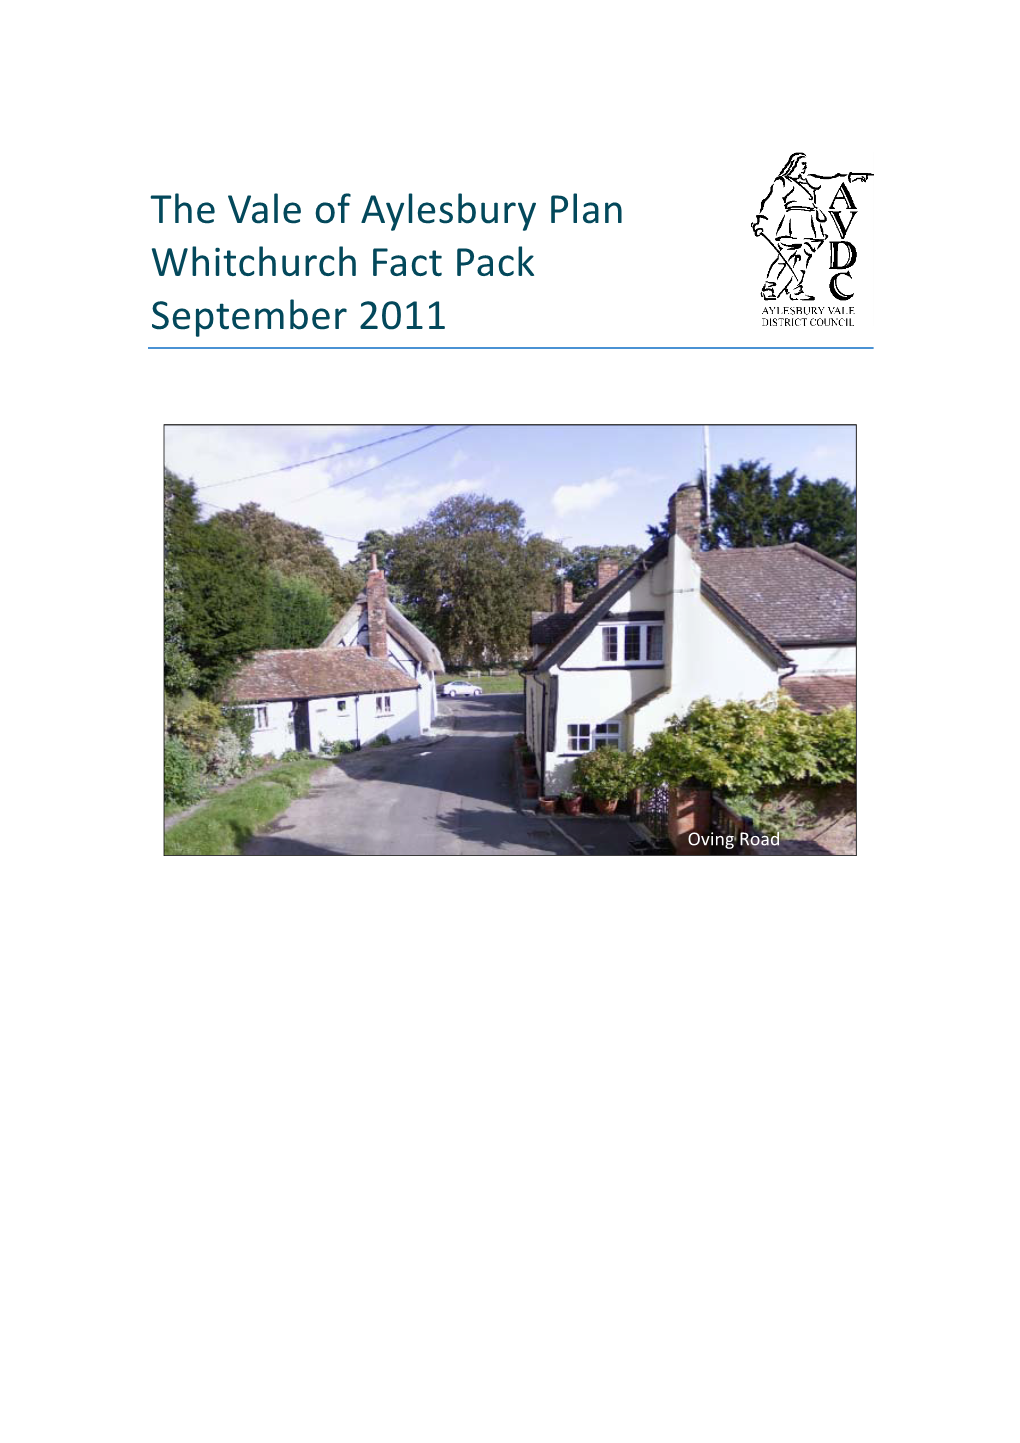 The Vale of Aylesbury Plan Whitchurch Fact Pack September 2011